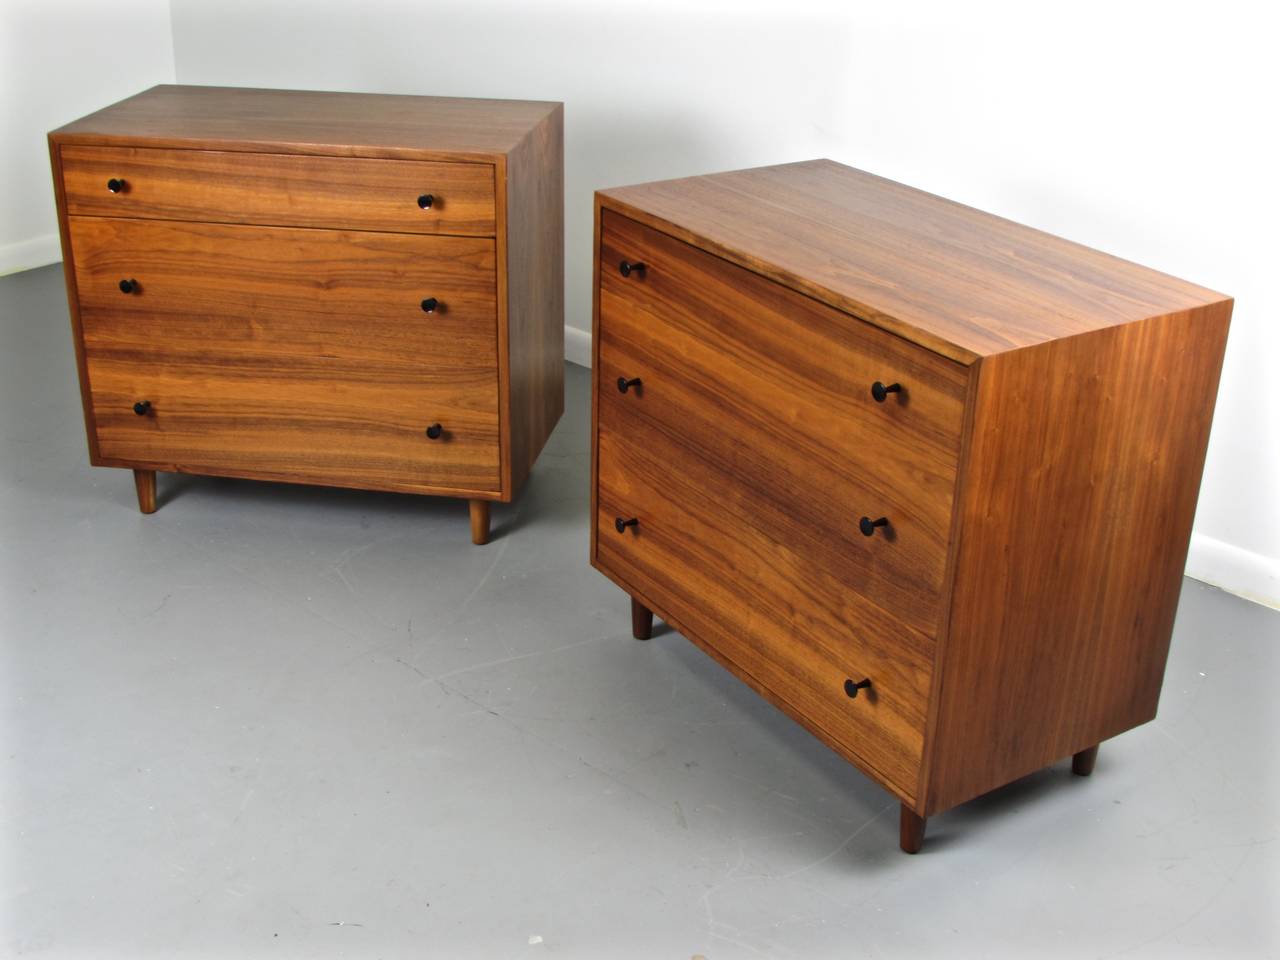 Spun Handsome Pair of Walnut Chests by Milo Baughman for Glenn of California, 1950s